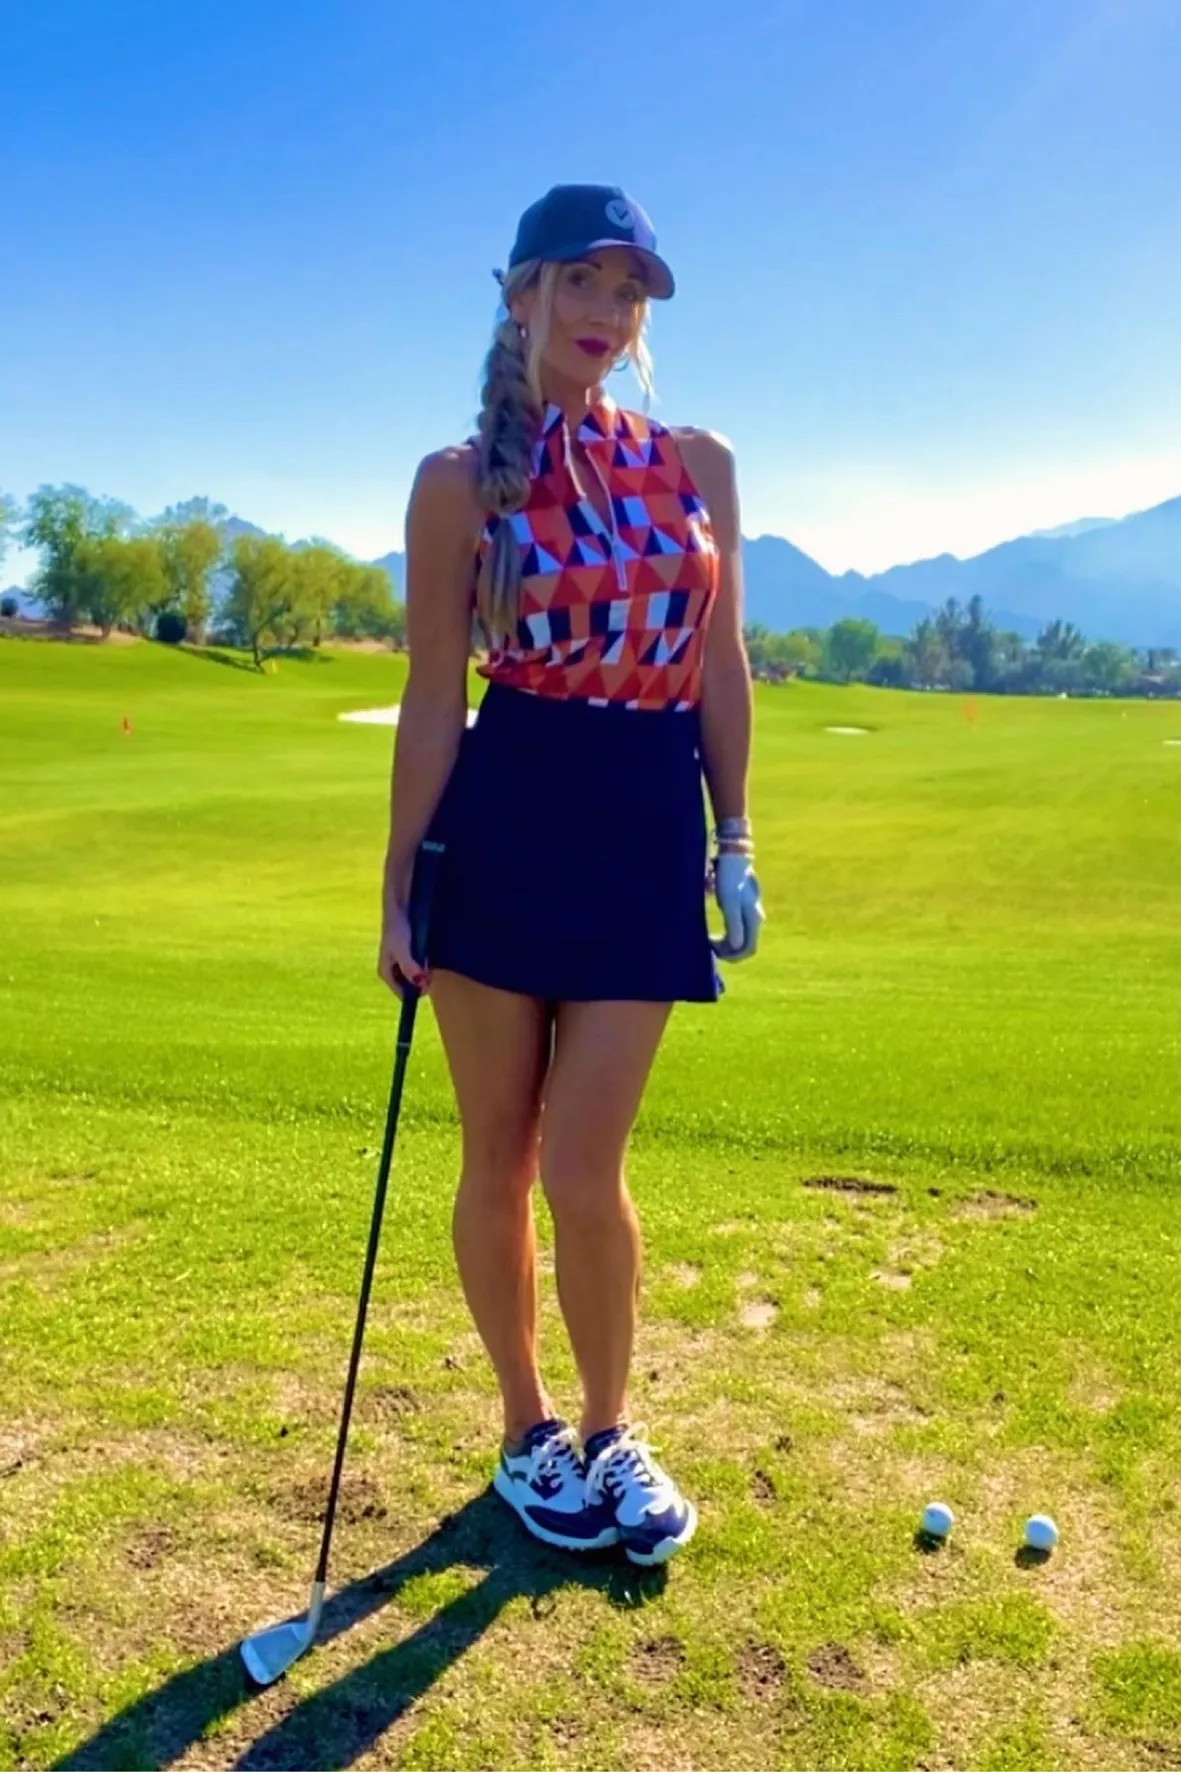 Women's Golf Clothes, Stylish Golf Dresses, and Cute Golf Outfits